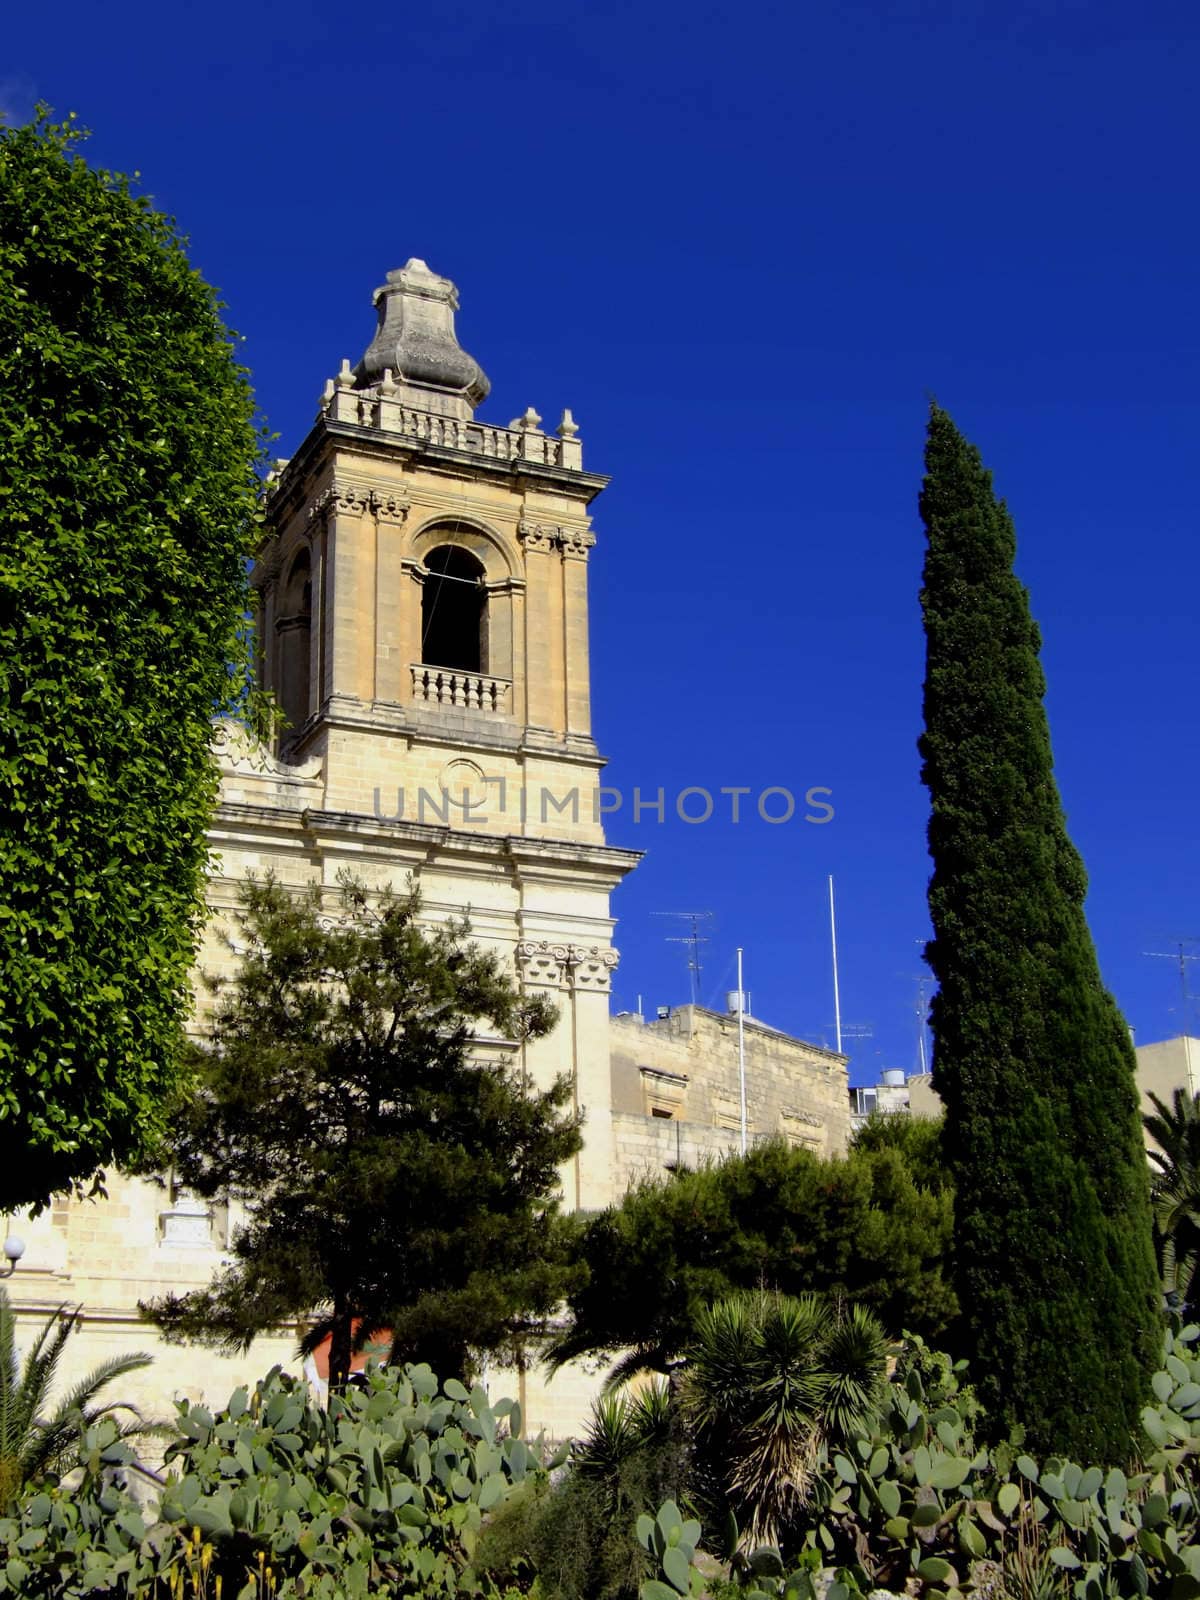 Baroque steeple of church in the Mediterranean island of Malta, and trees in foreground